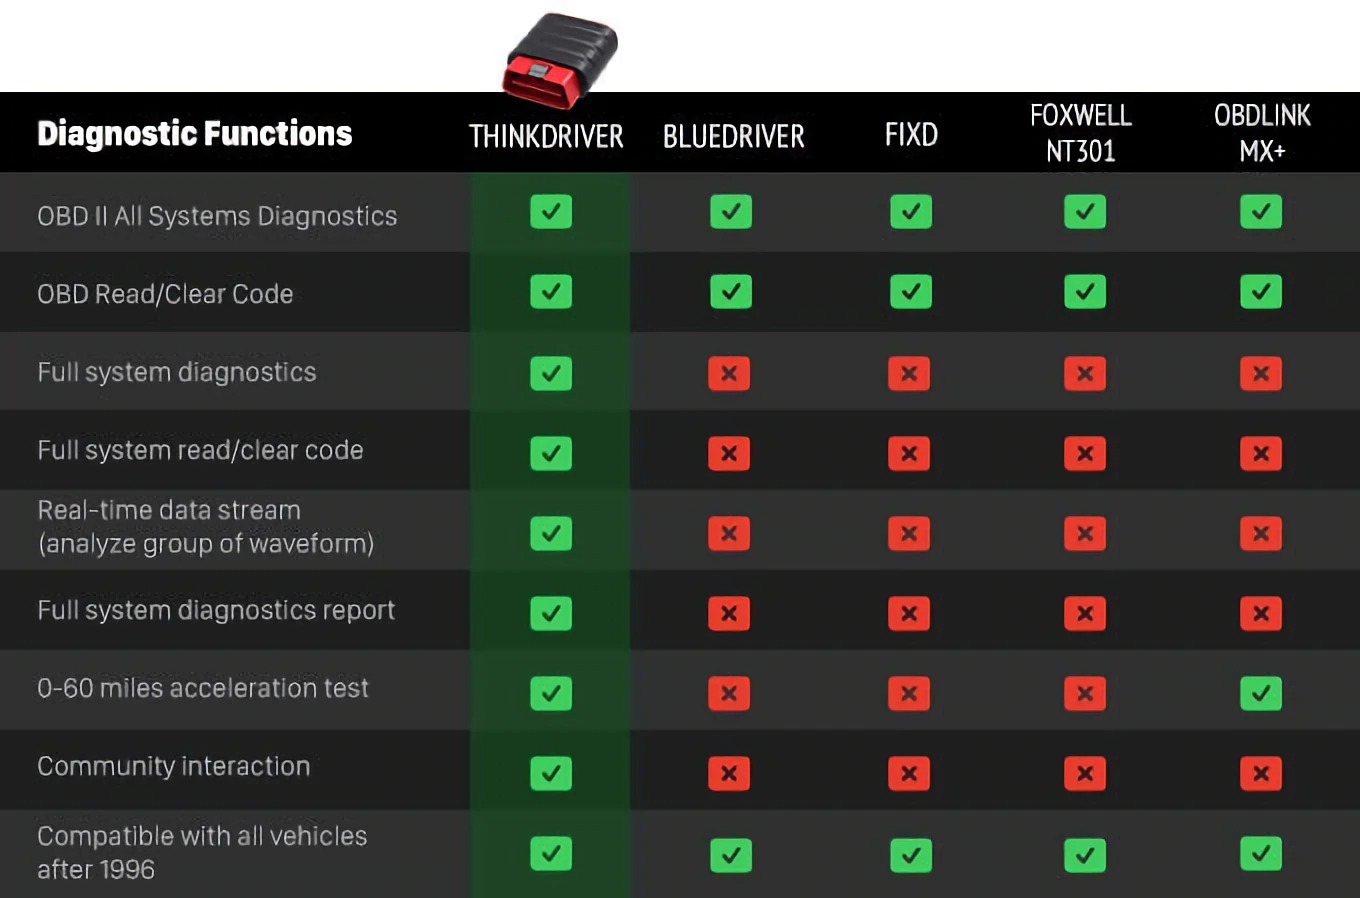 Thinkdriver features compared with other products